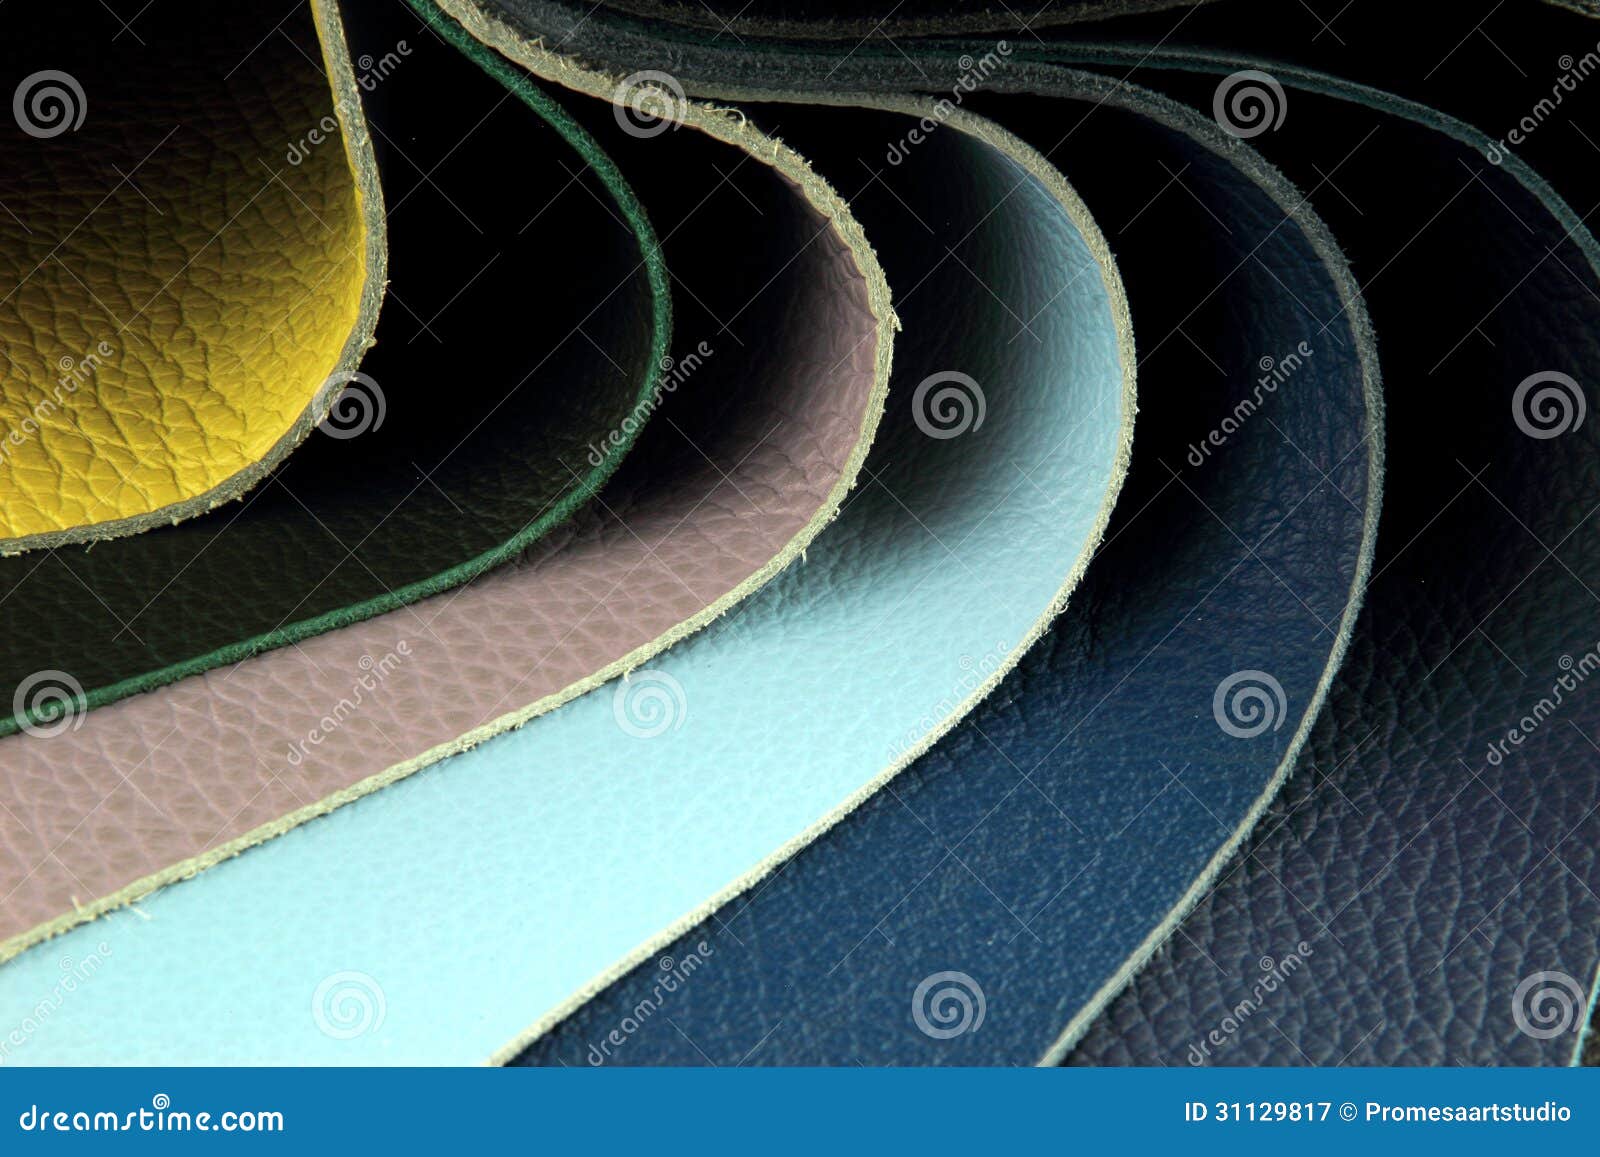 Color Palette Sample Picker of Leather Material Stock Image - Image of ...